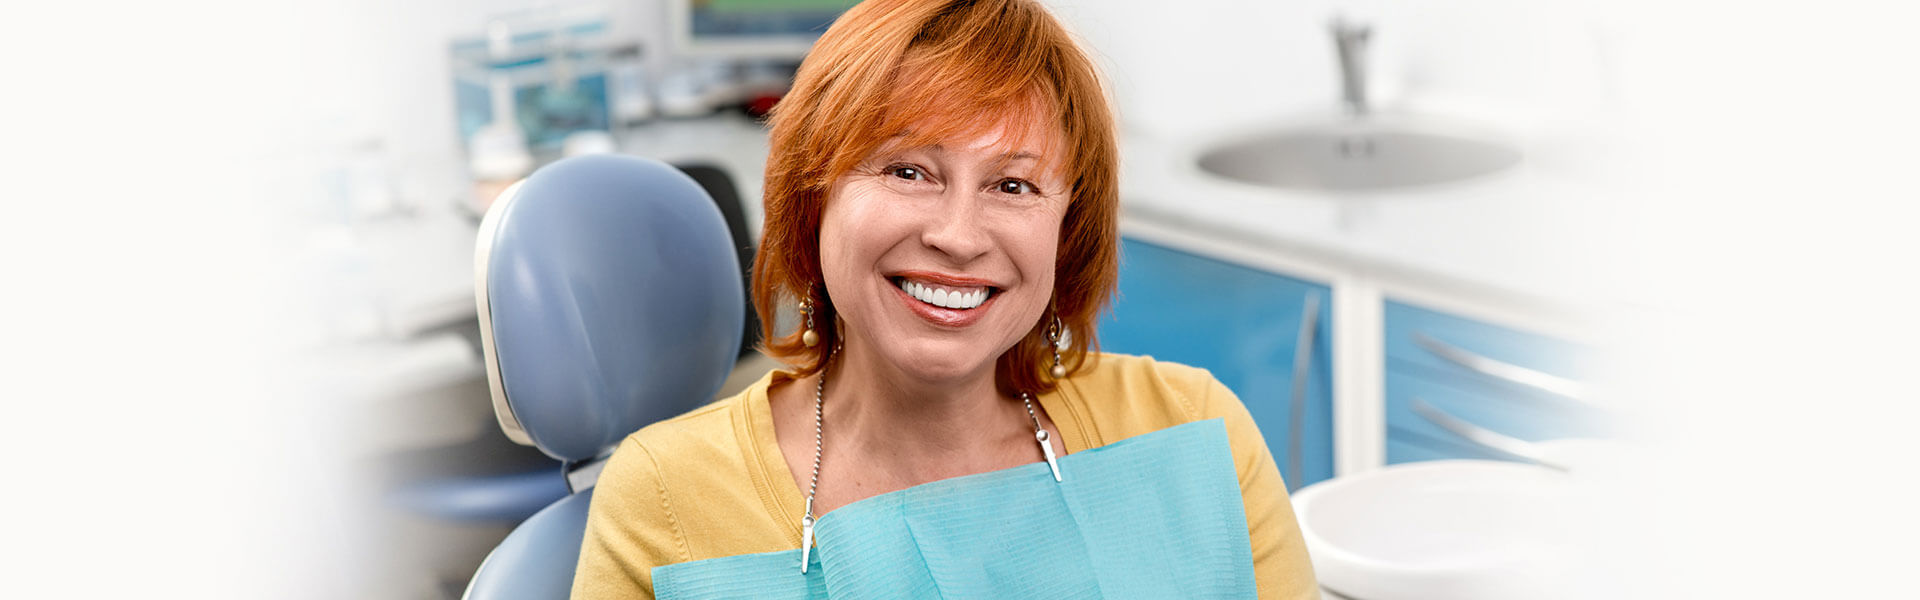 6 Frequently Asked Questions About Preventive Dentistry in Baltimore, MD